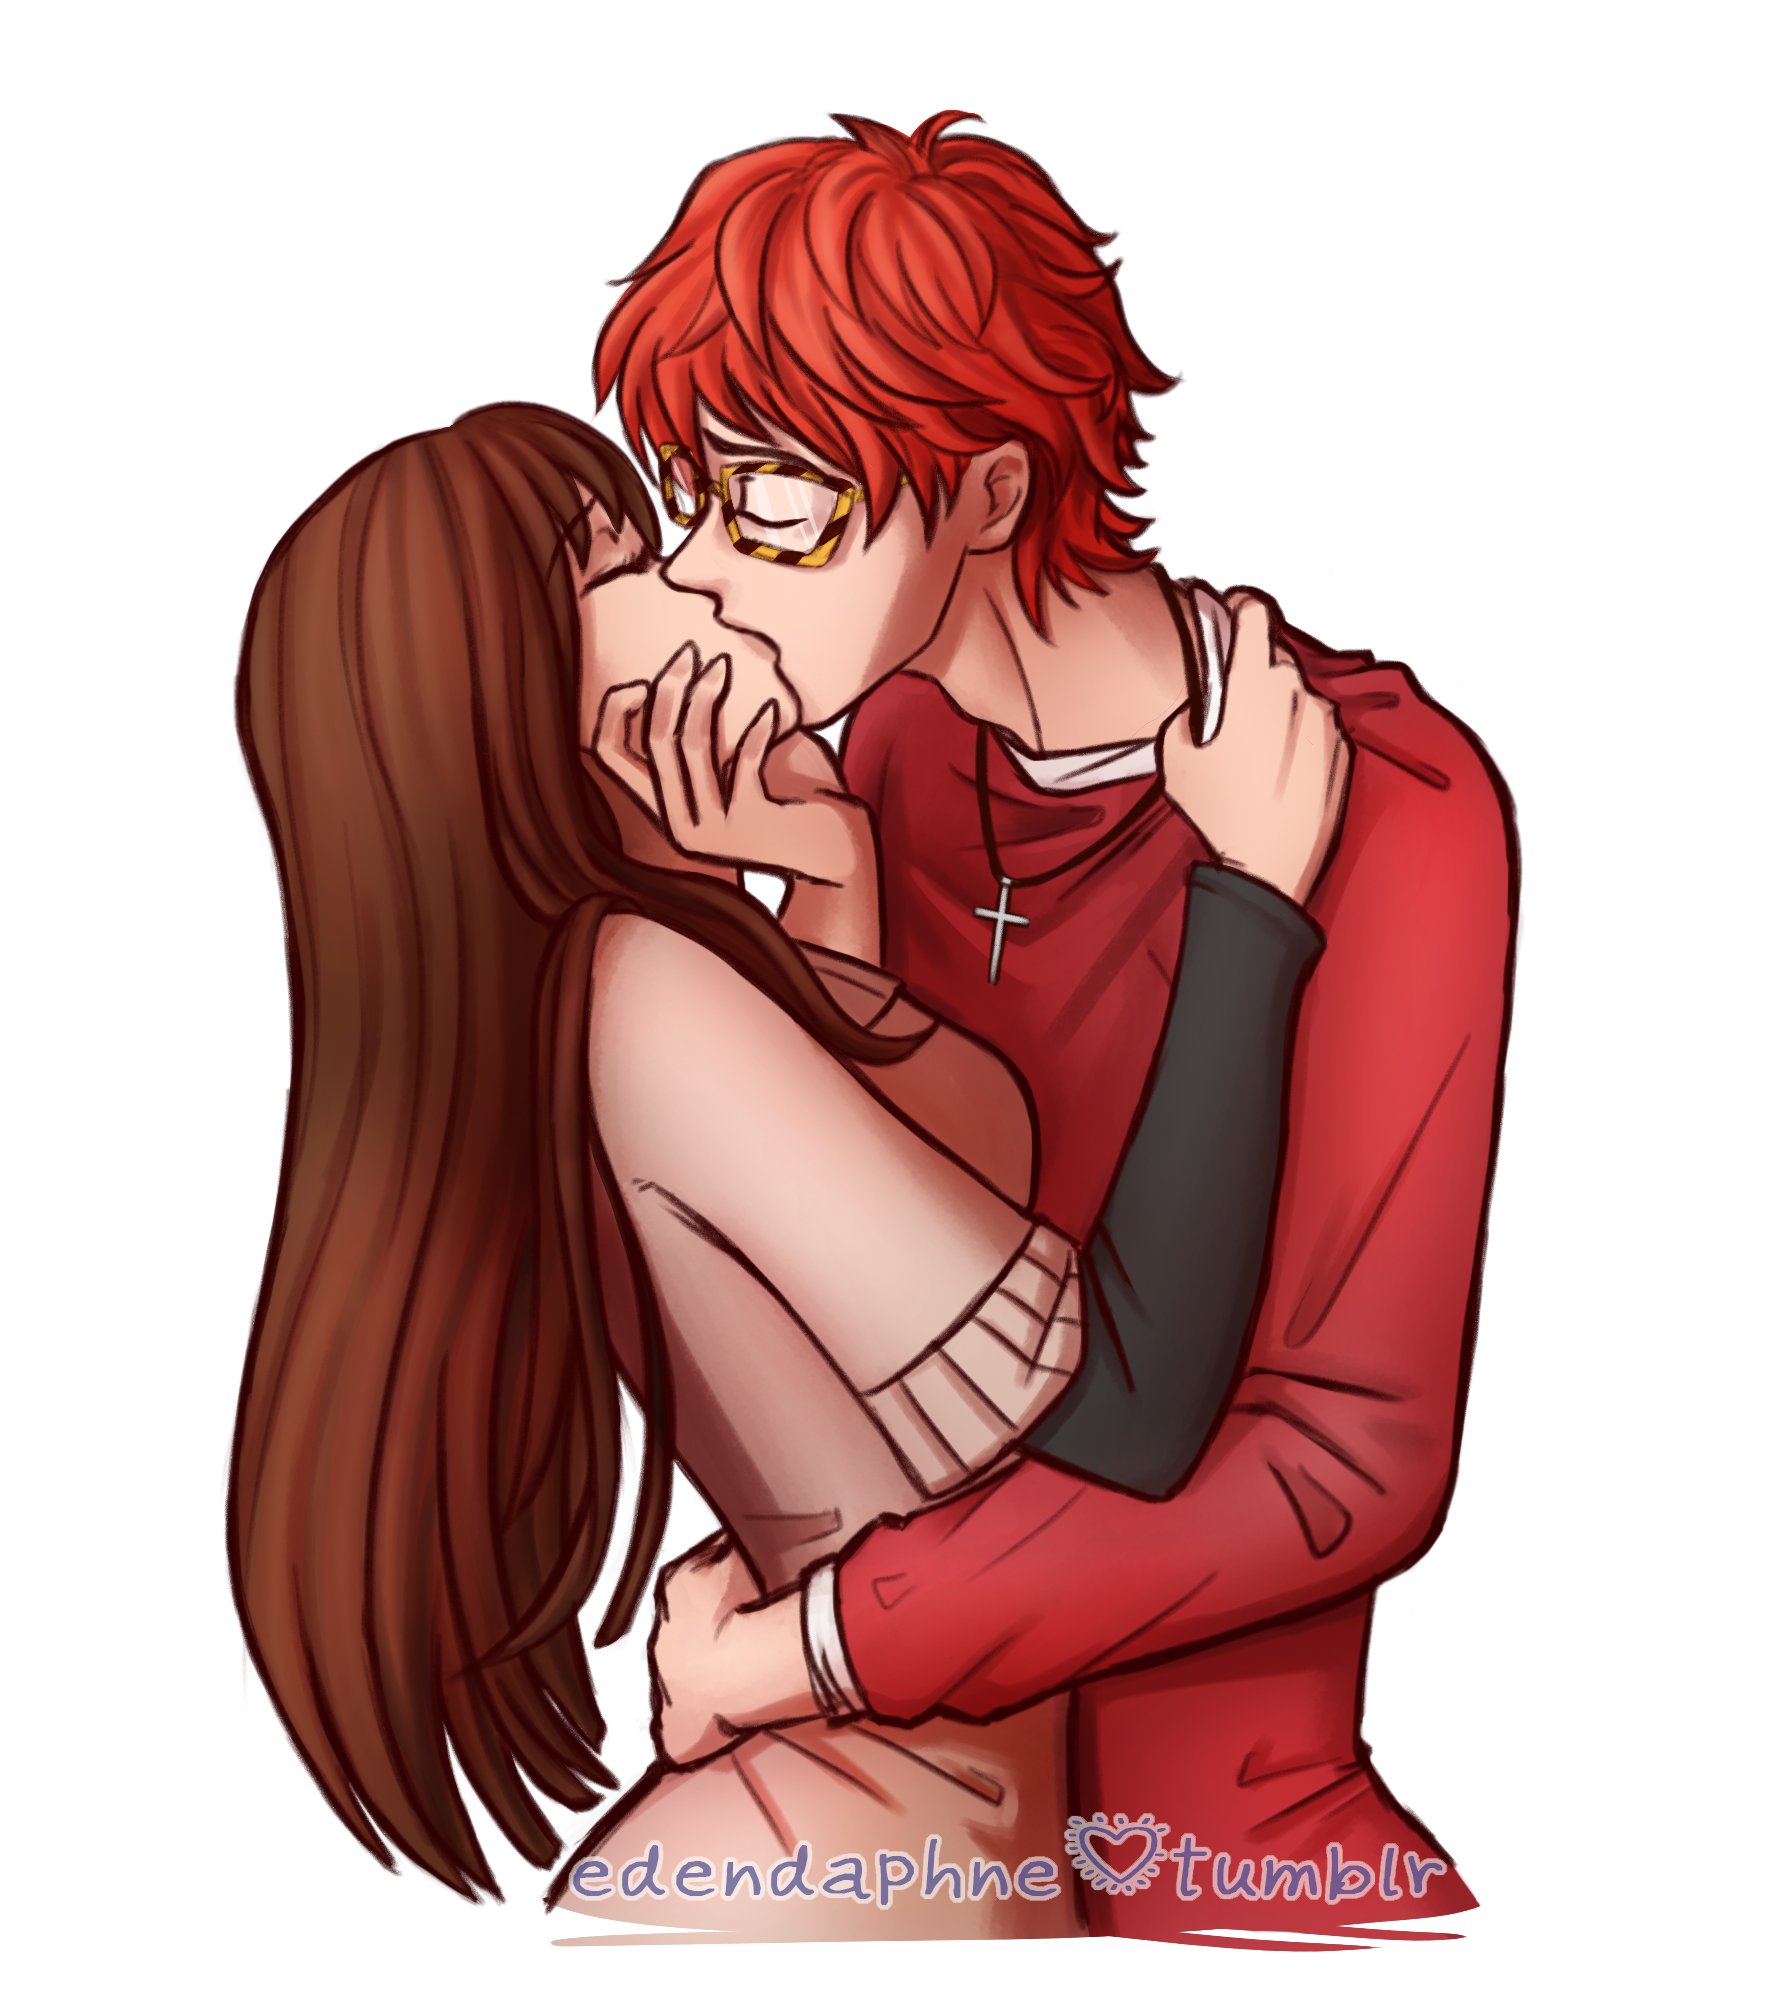 “Just played through #MysticMessenger's #707route and got the #Good...